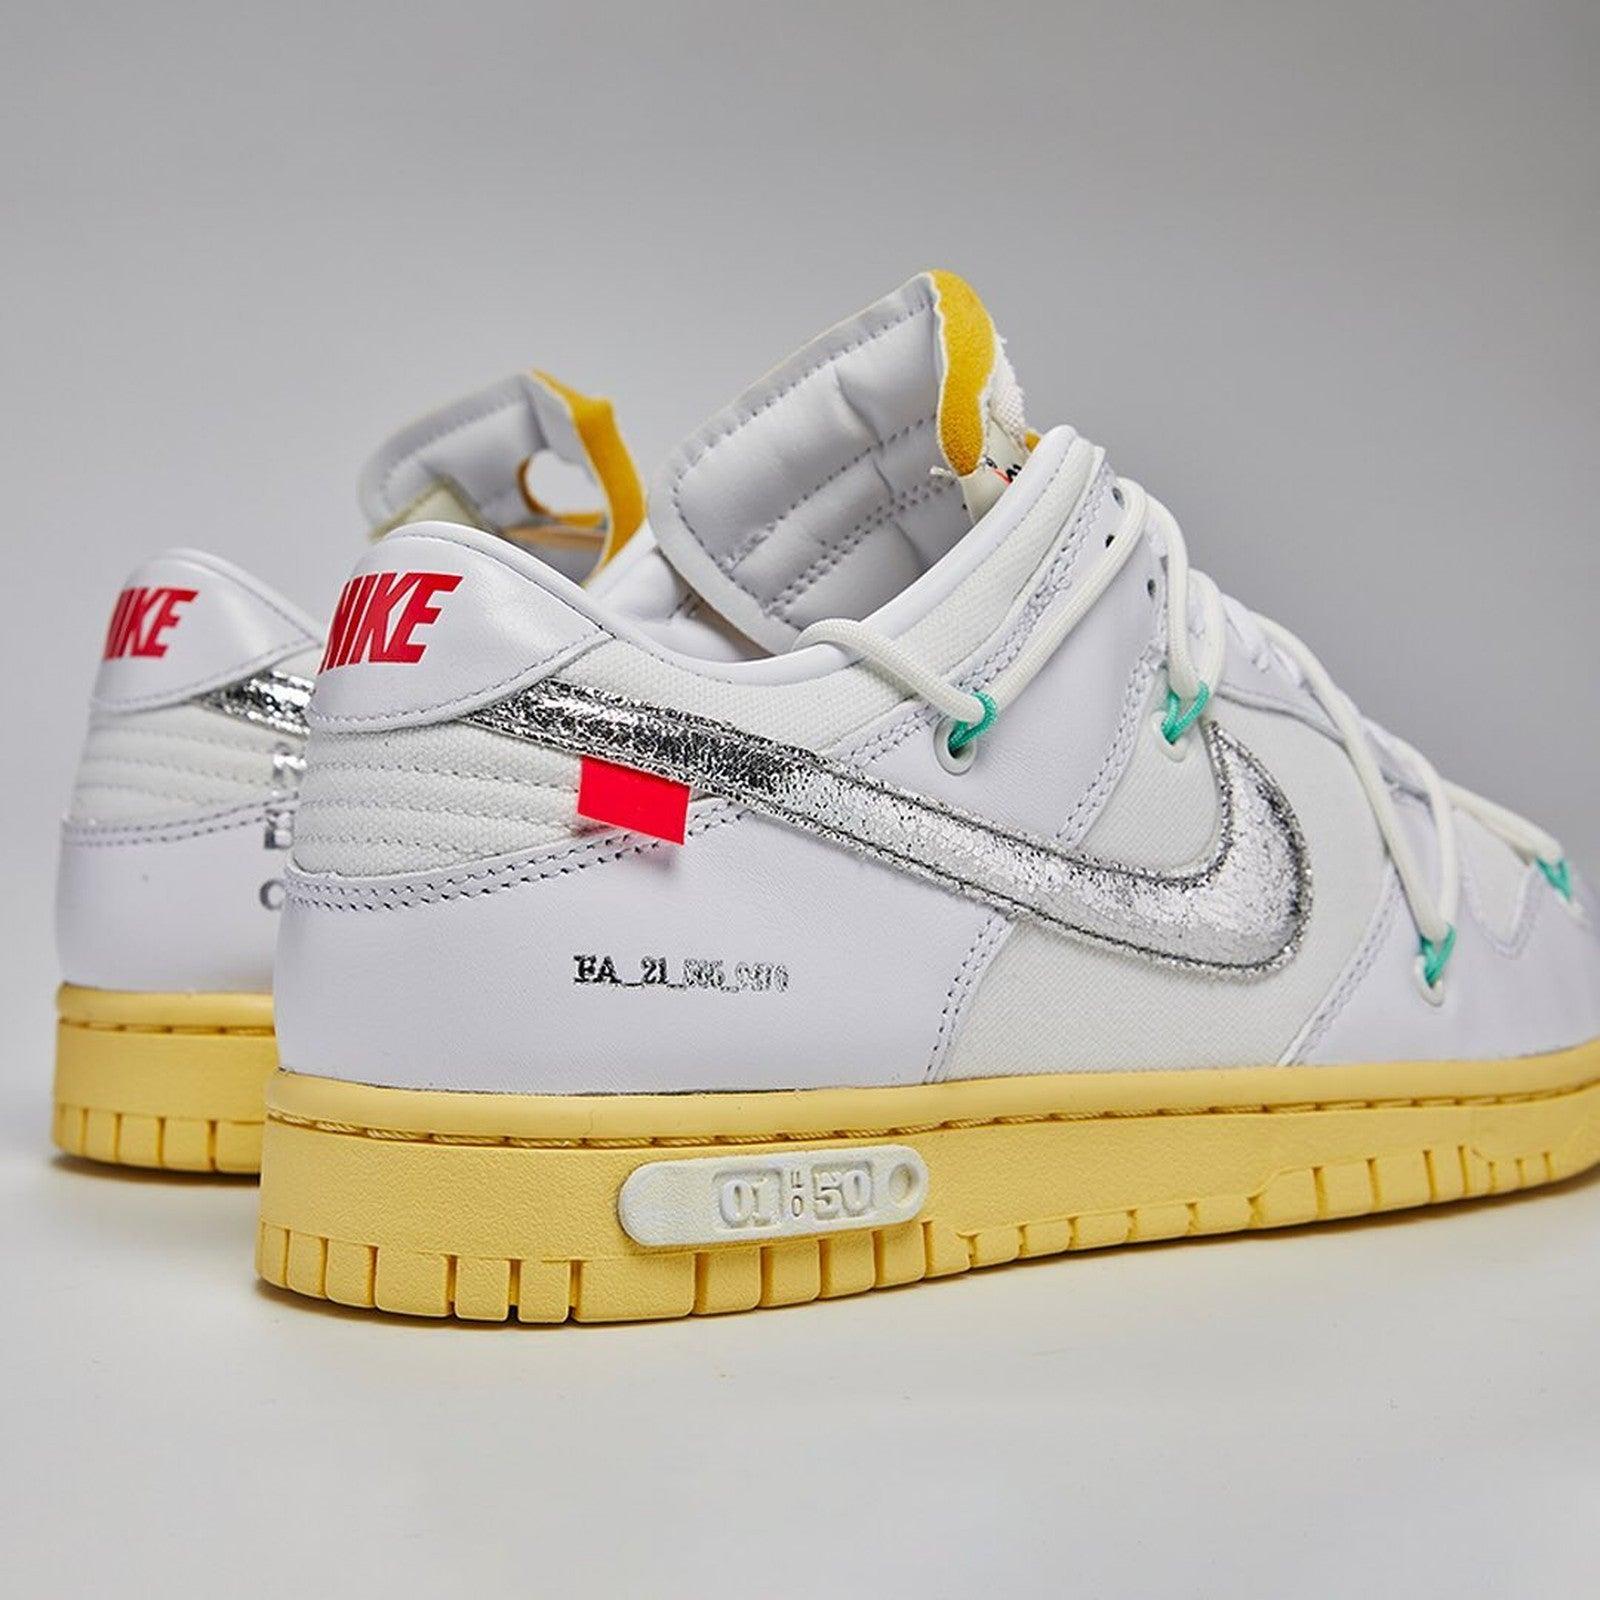 Off-White × NIKE Dunk Low "The50" Lot47